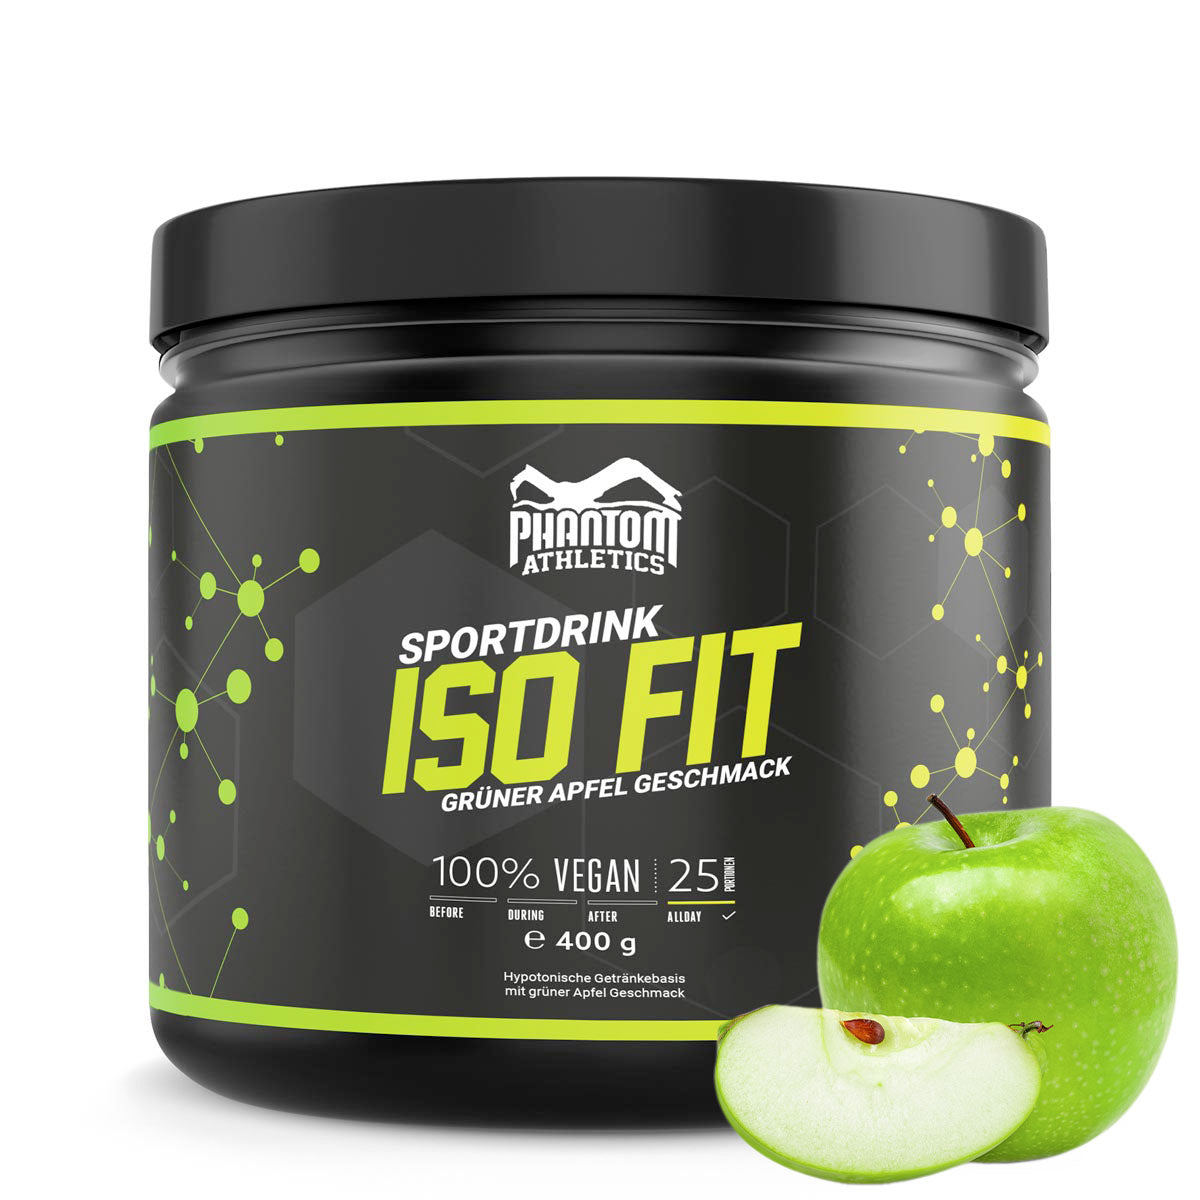 The Phantom ISO FIT nutritional supplement provides you with everything you need for martial arts training. Now with a delicious green apple taste.